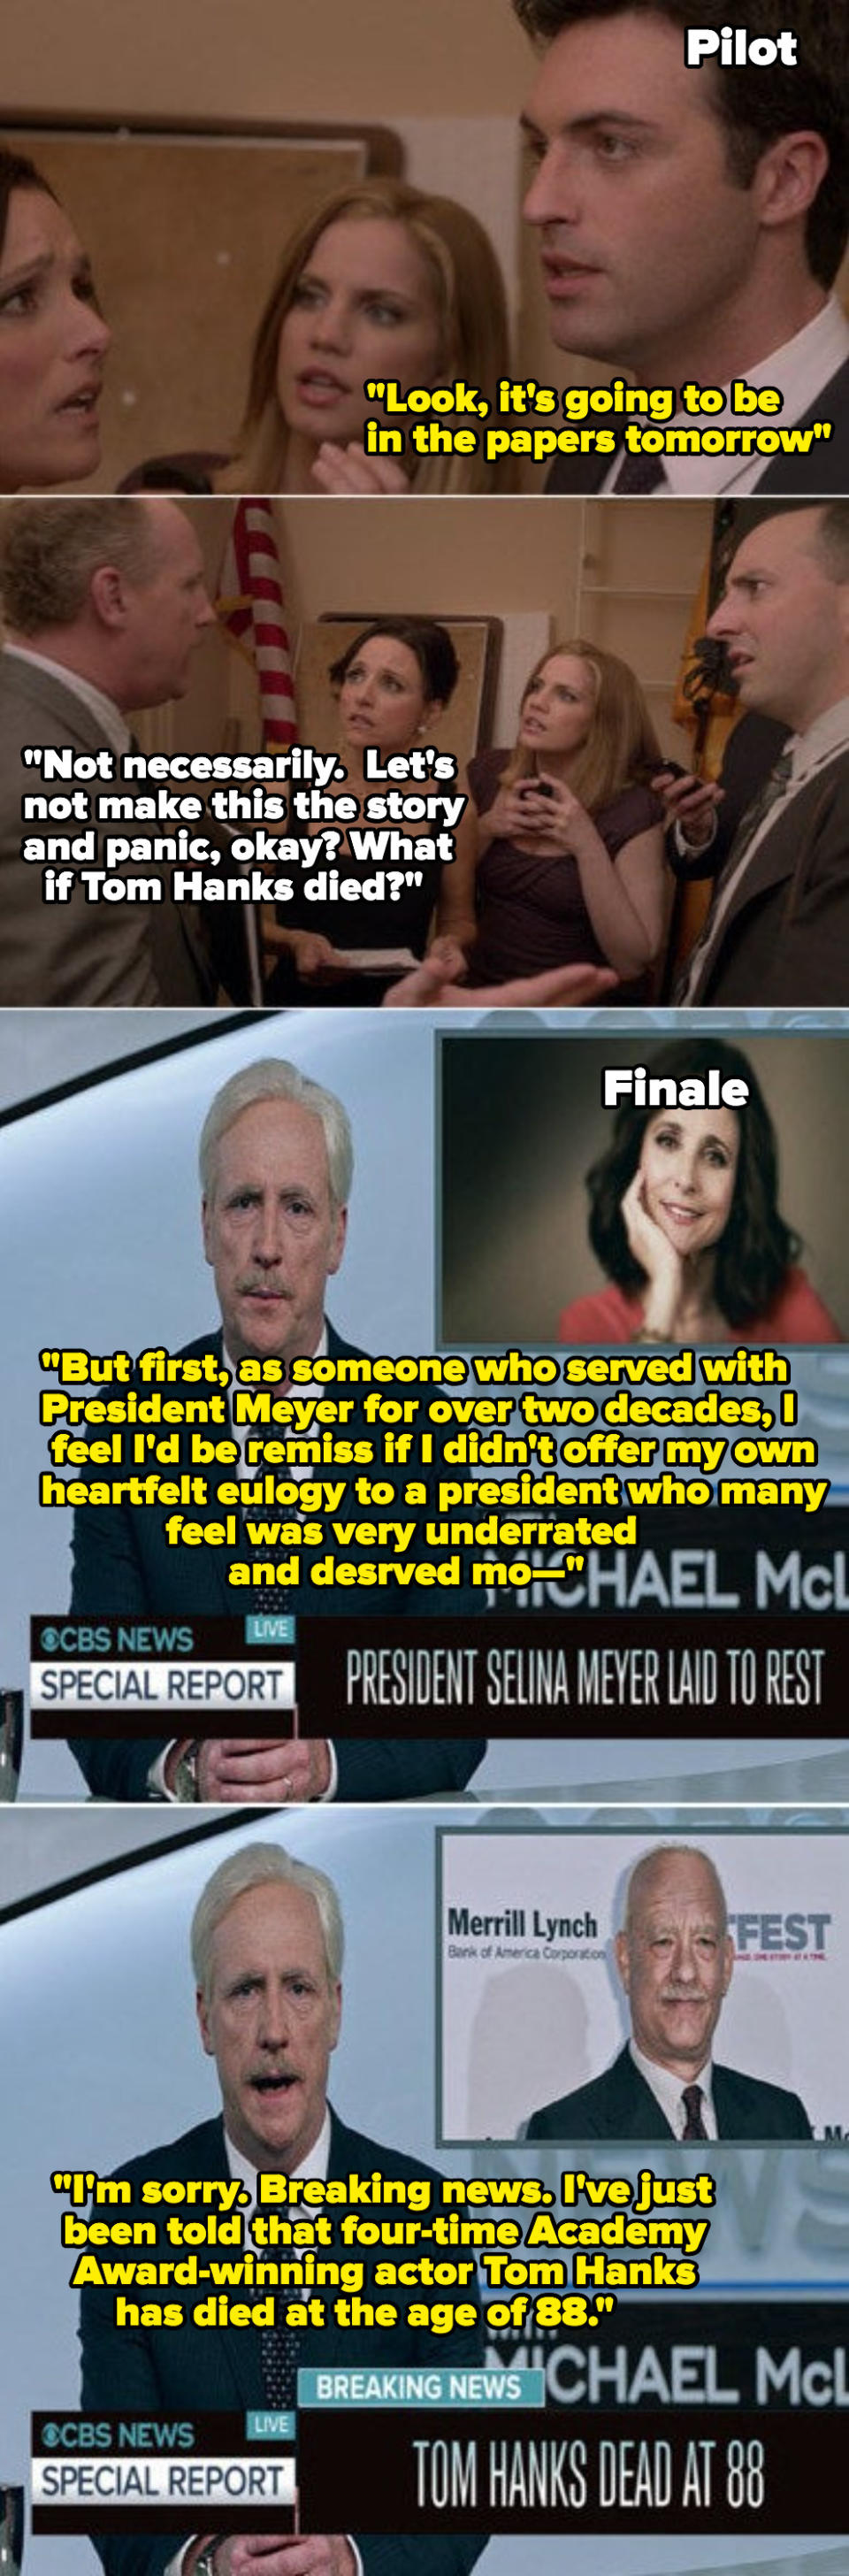 The news on TV about Selina's death being interrupted with breaking news of Tom Hanks' death